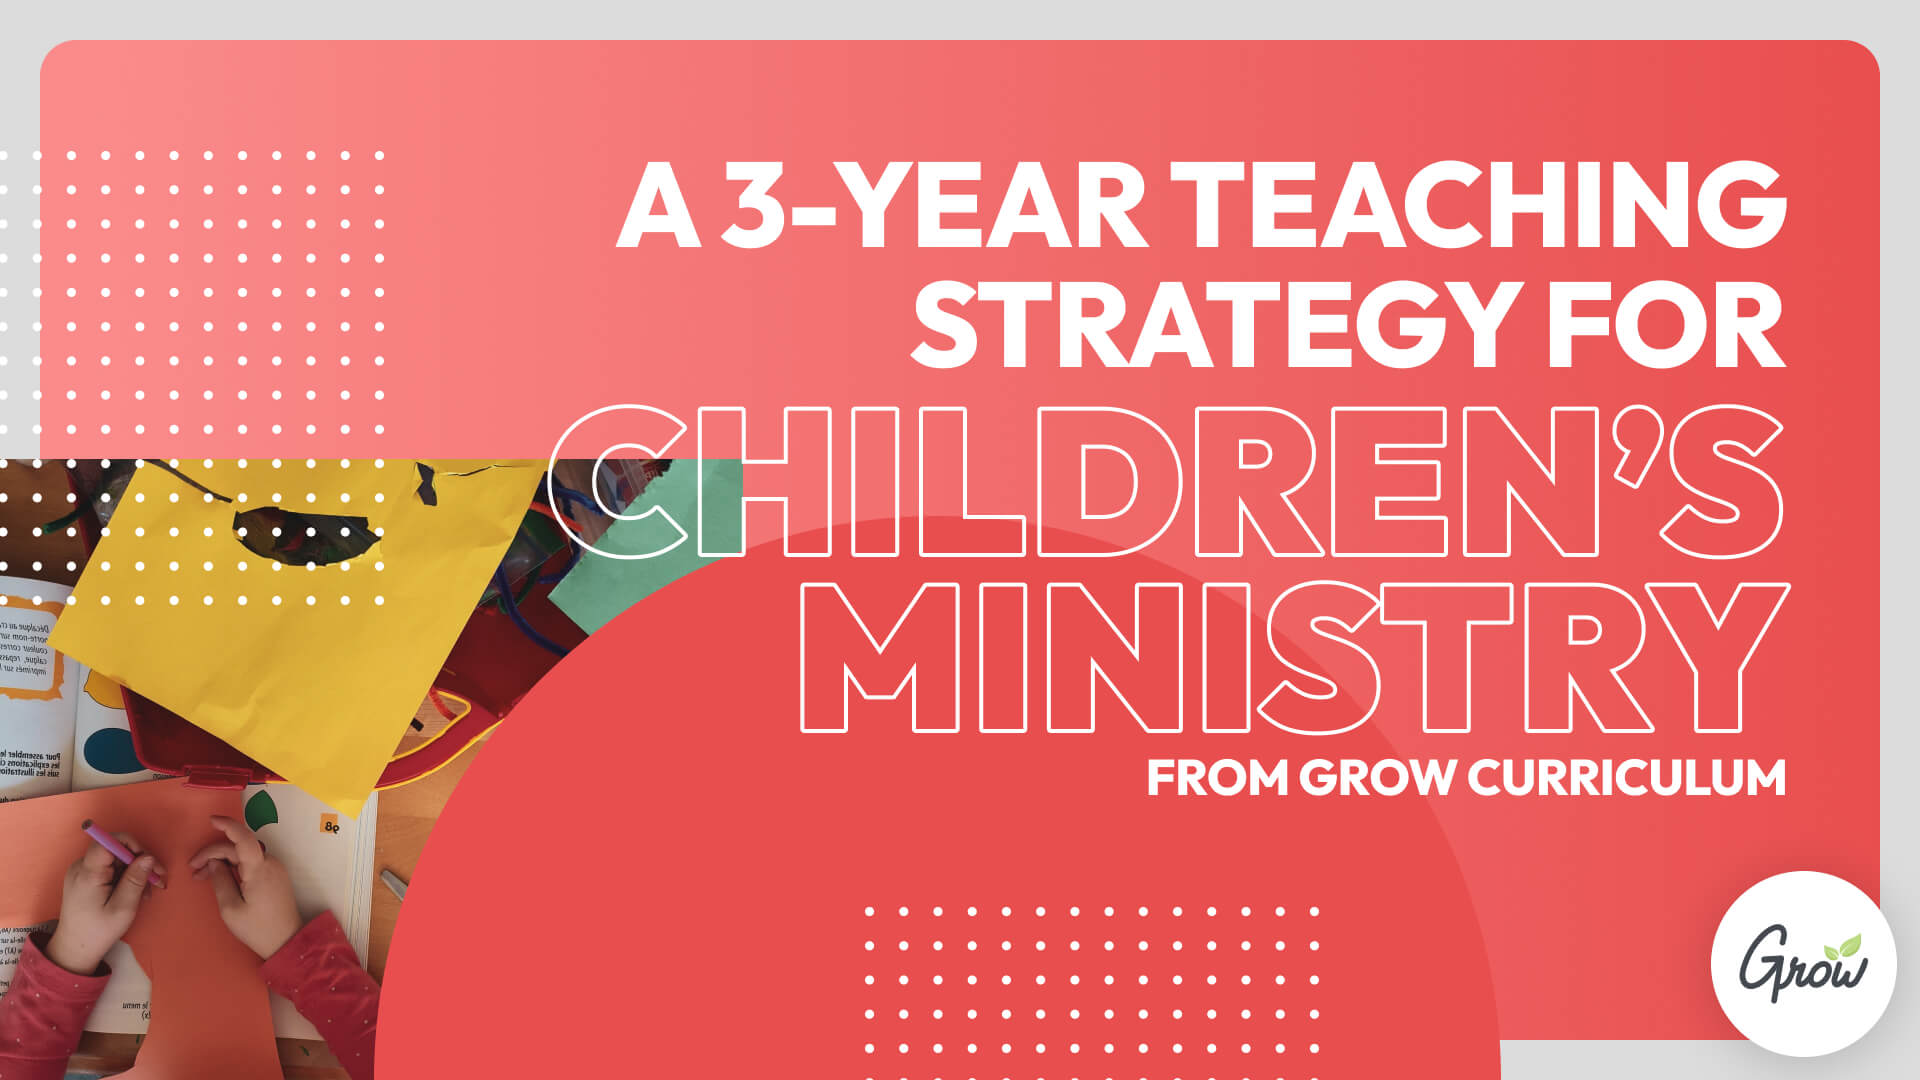 A 3-Year Teaching Strategy for Children's Ministry from Grow Curriculum